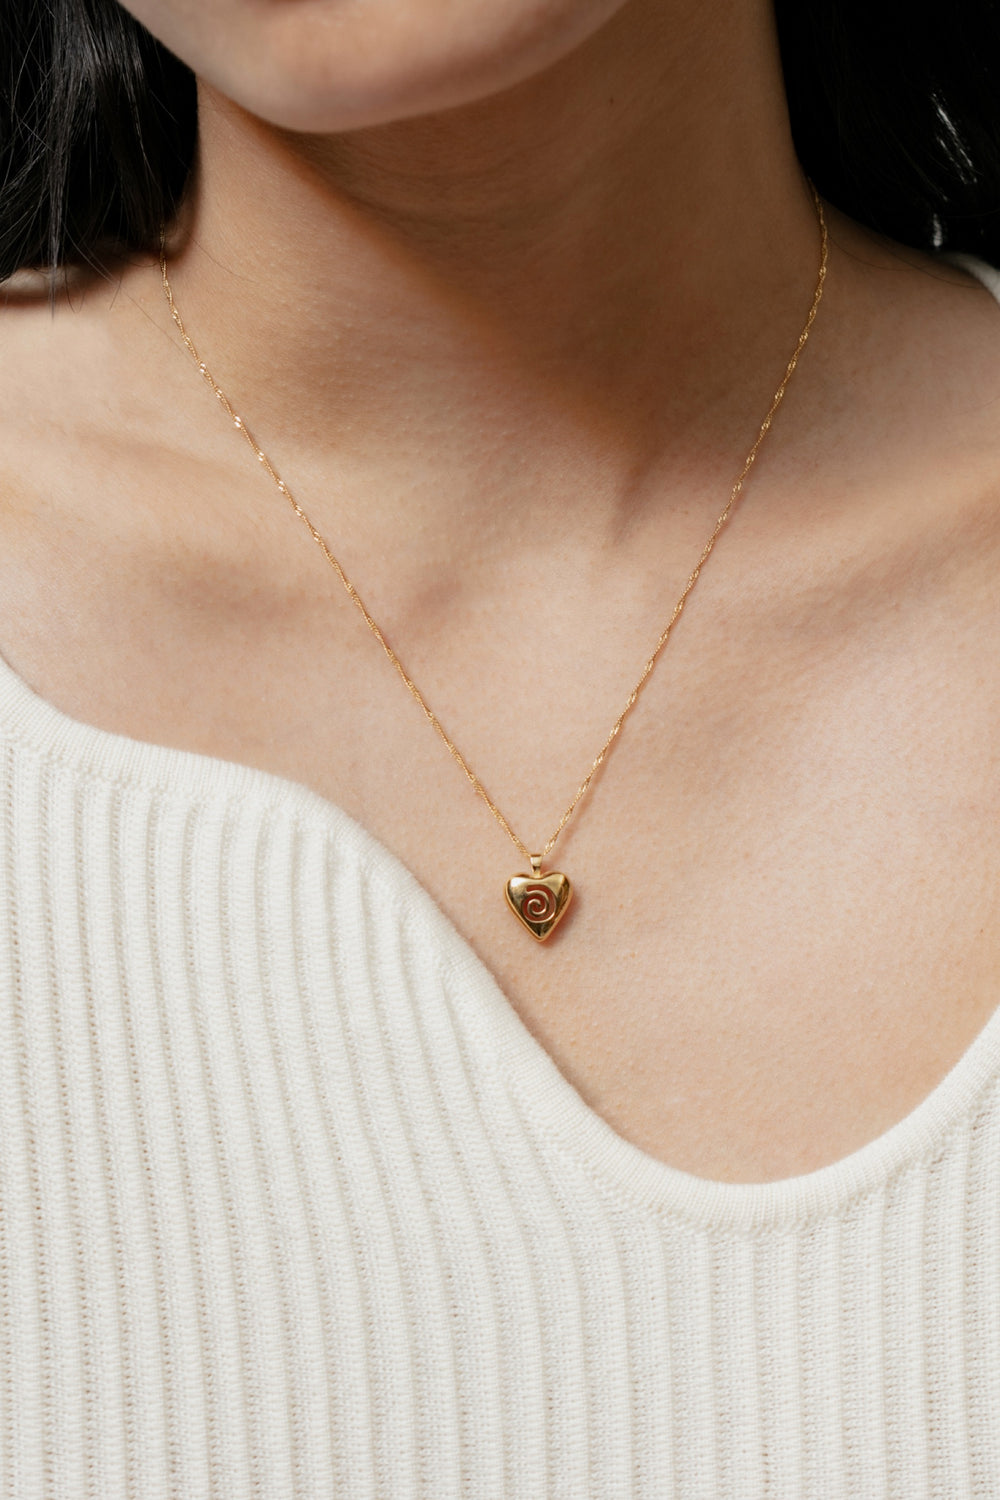 Gold Heart Swirl Charm Necklace